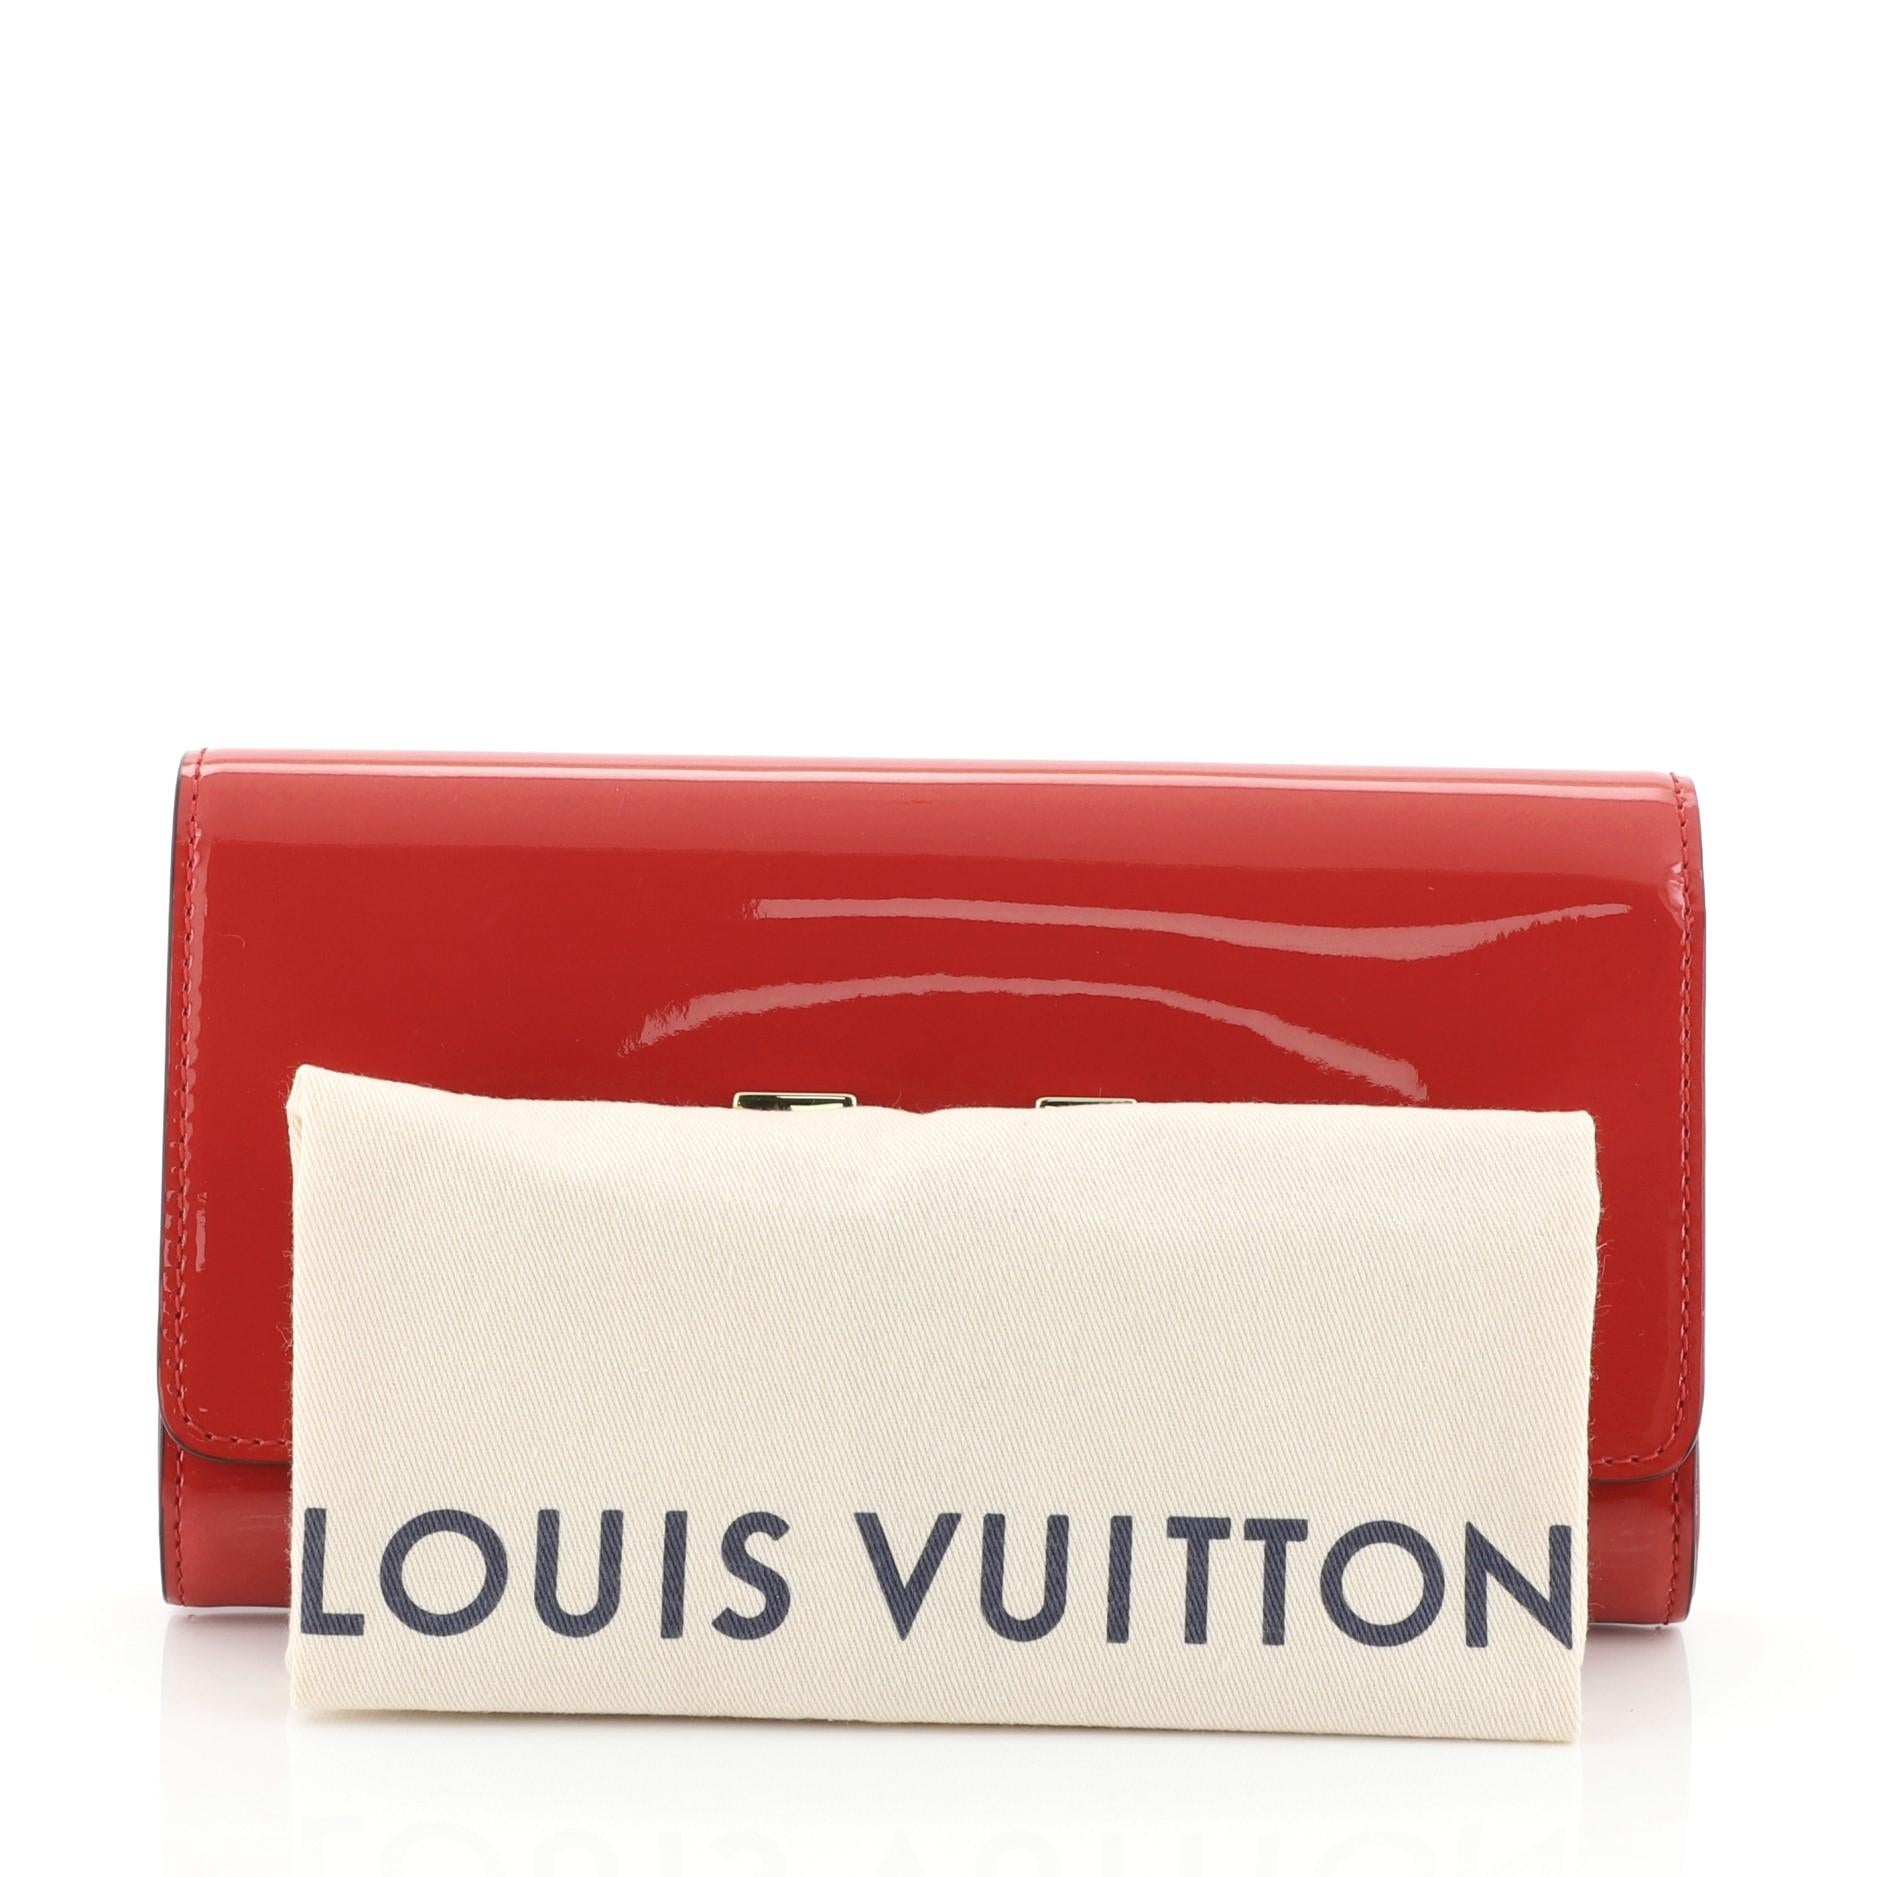 This Louis Vuitton Louise Clutch Patent East West, crafted in red leather, features an oversized LV logo flip lock and gold-tone hardware. Its flap with flip lock closure opens to a red fabric interior with zip and slip pockets. Authenticity code